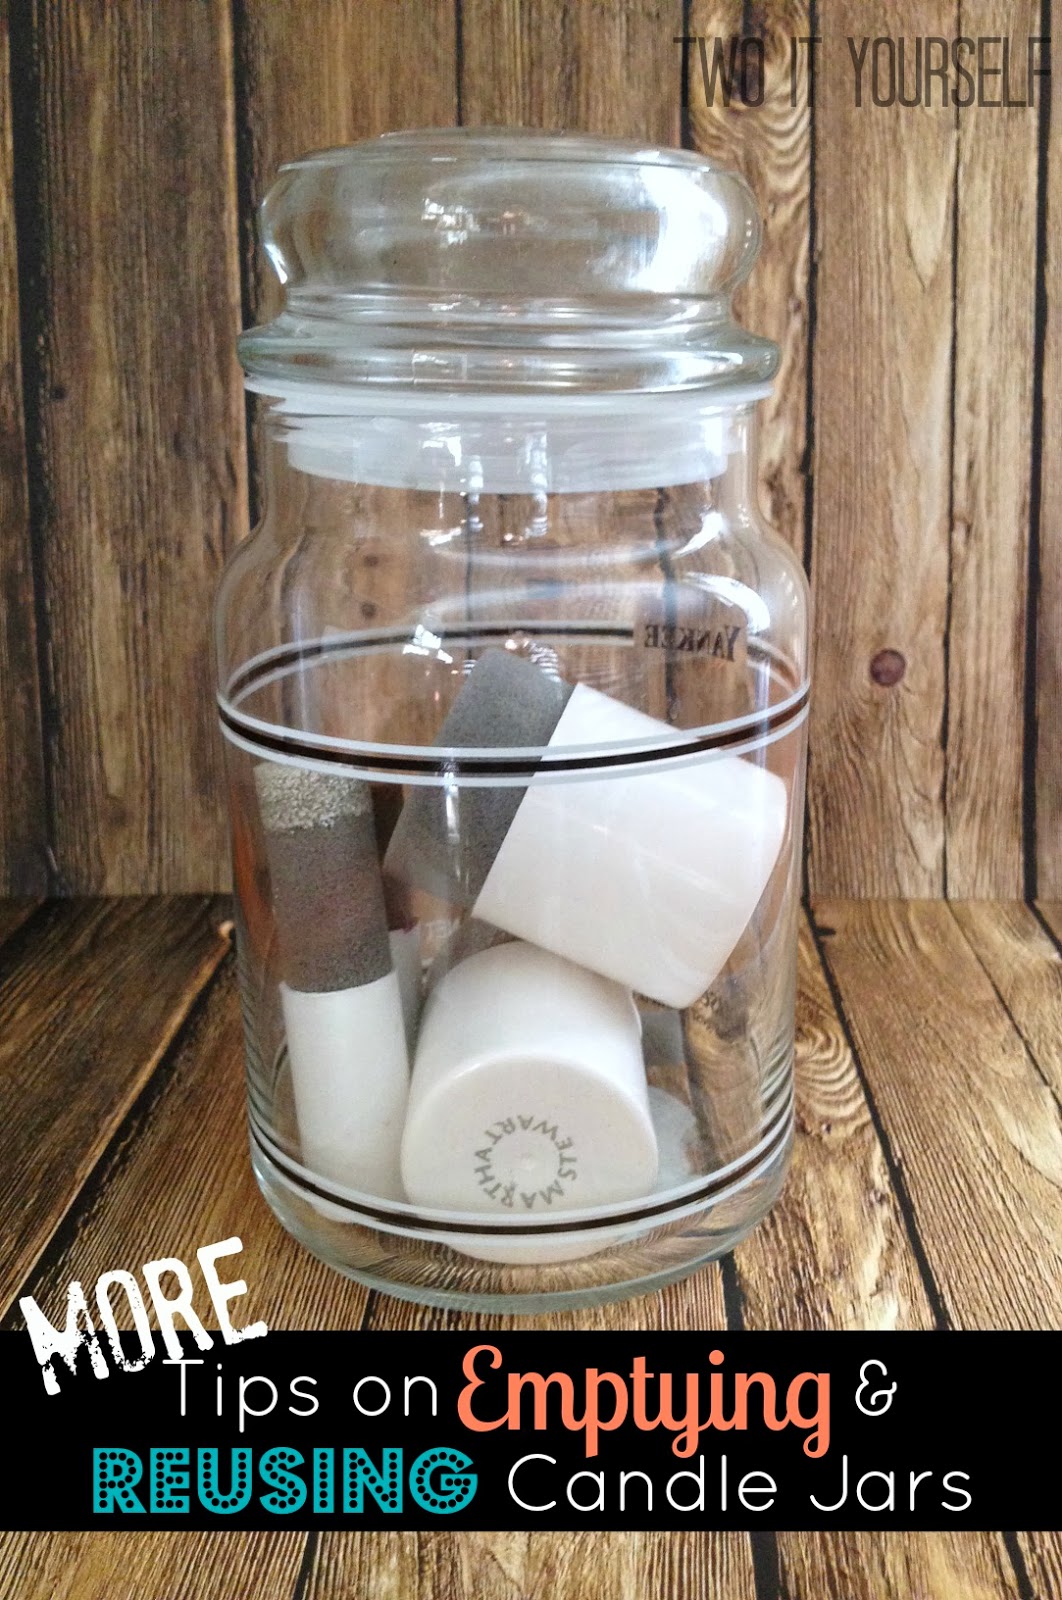 How to Reuse Candle Jars